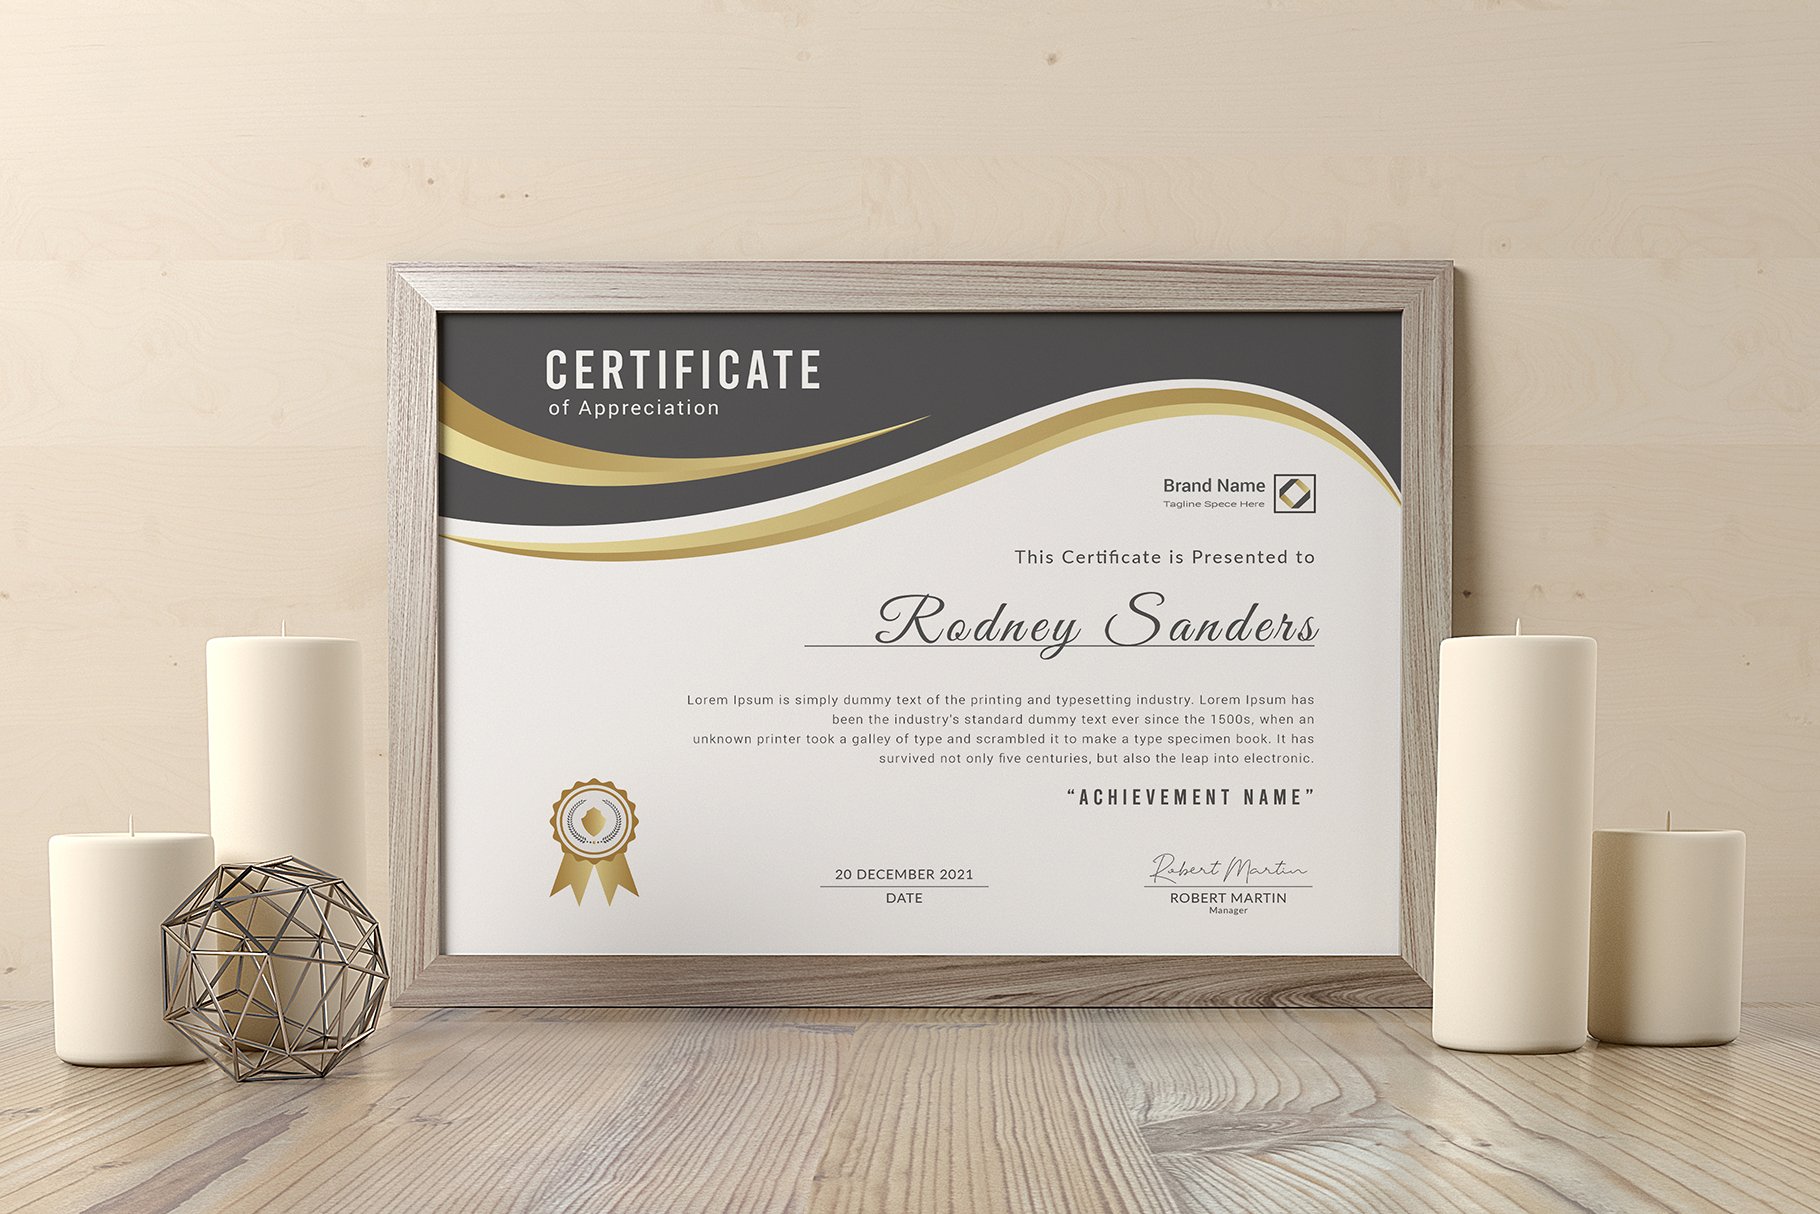 Modern Certificate of Appreciation preview image.